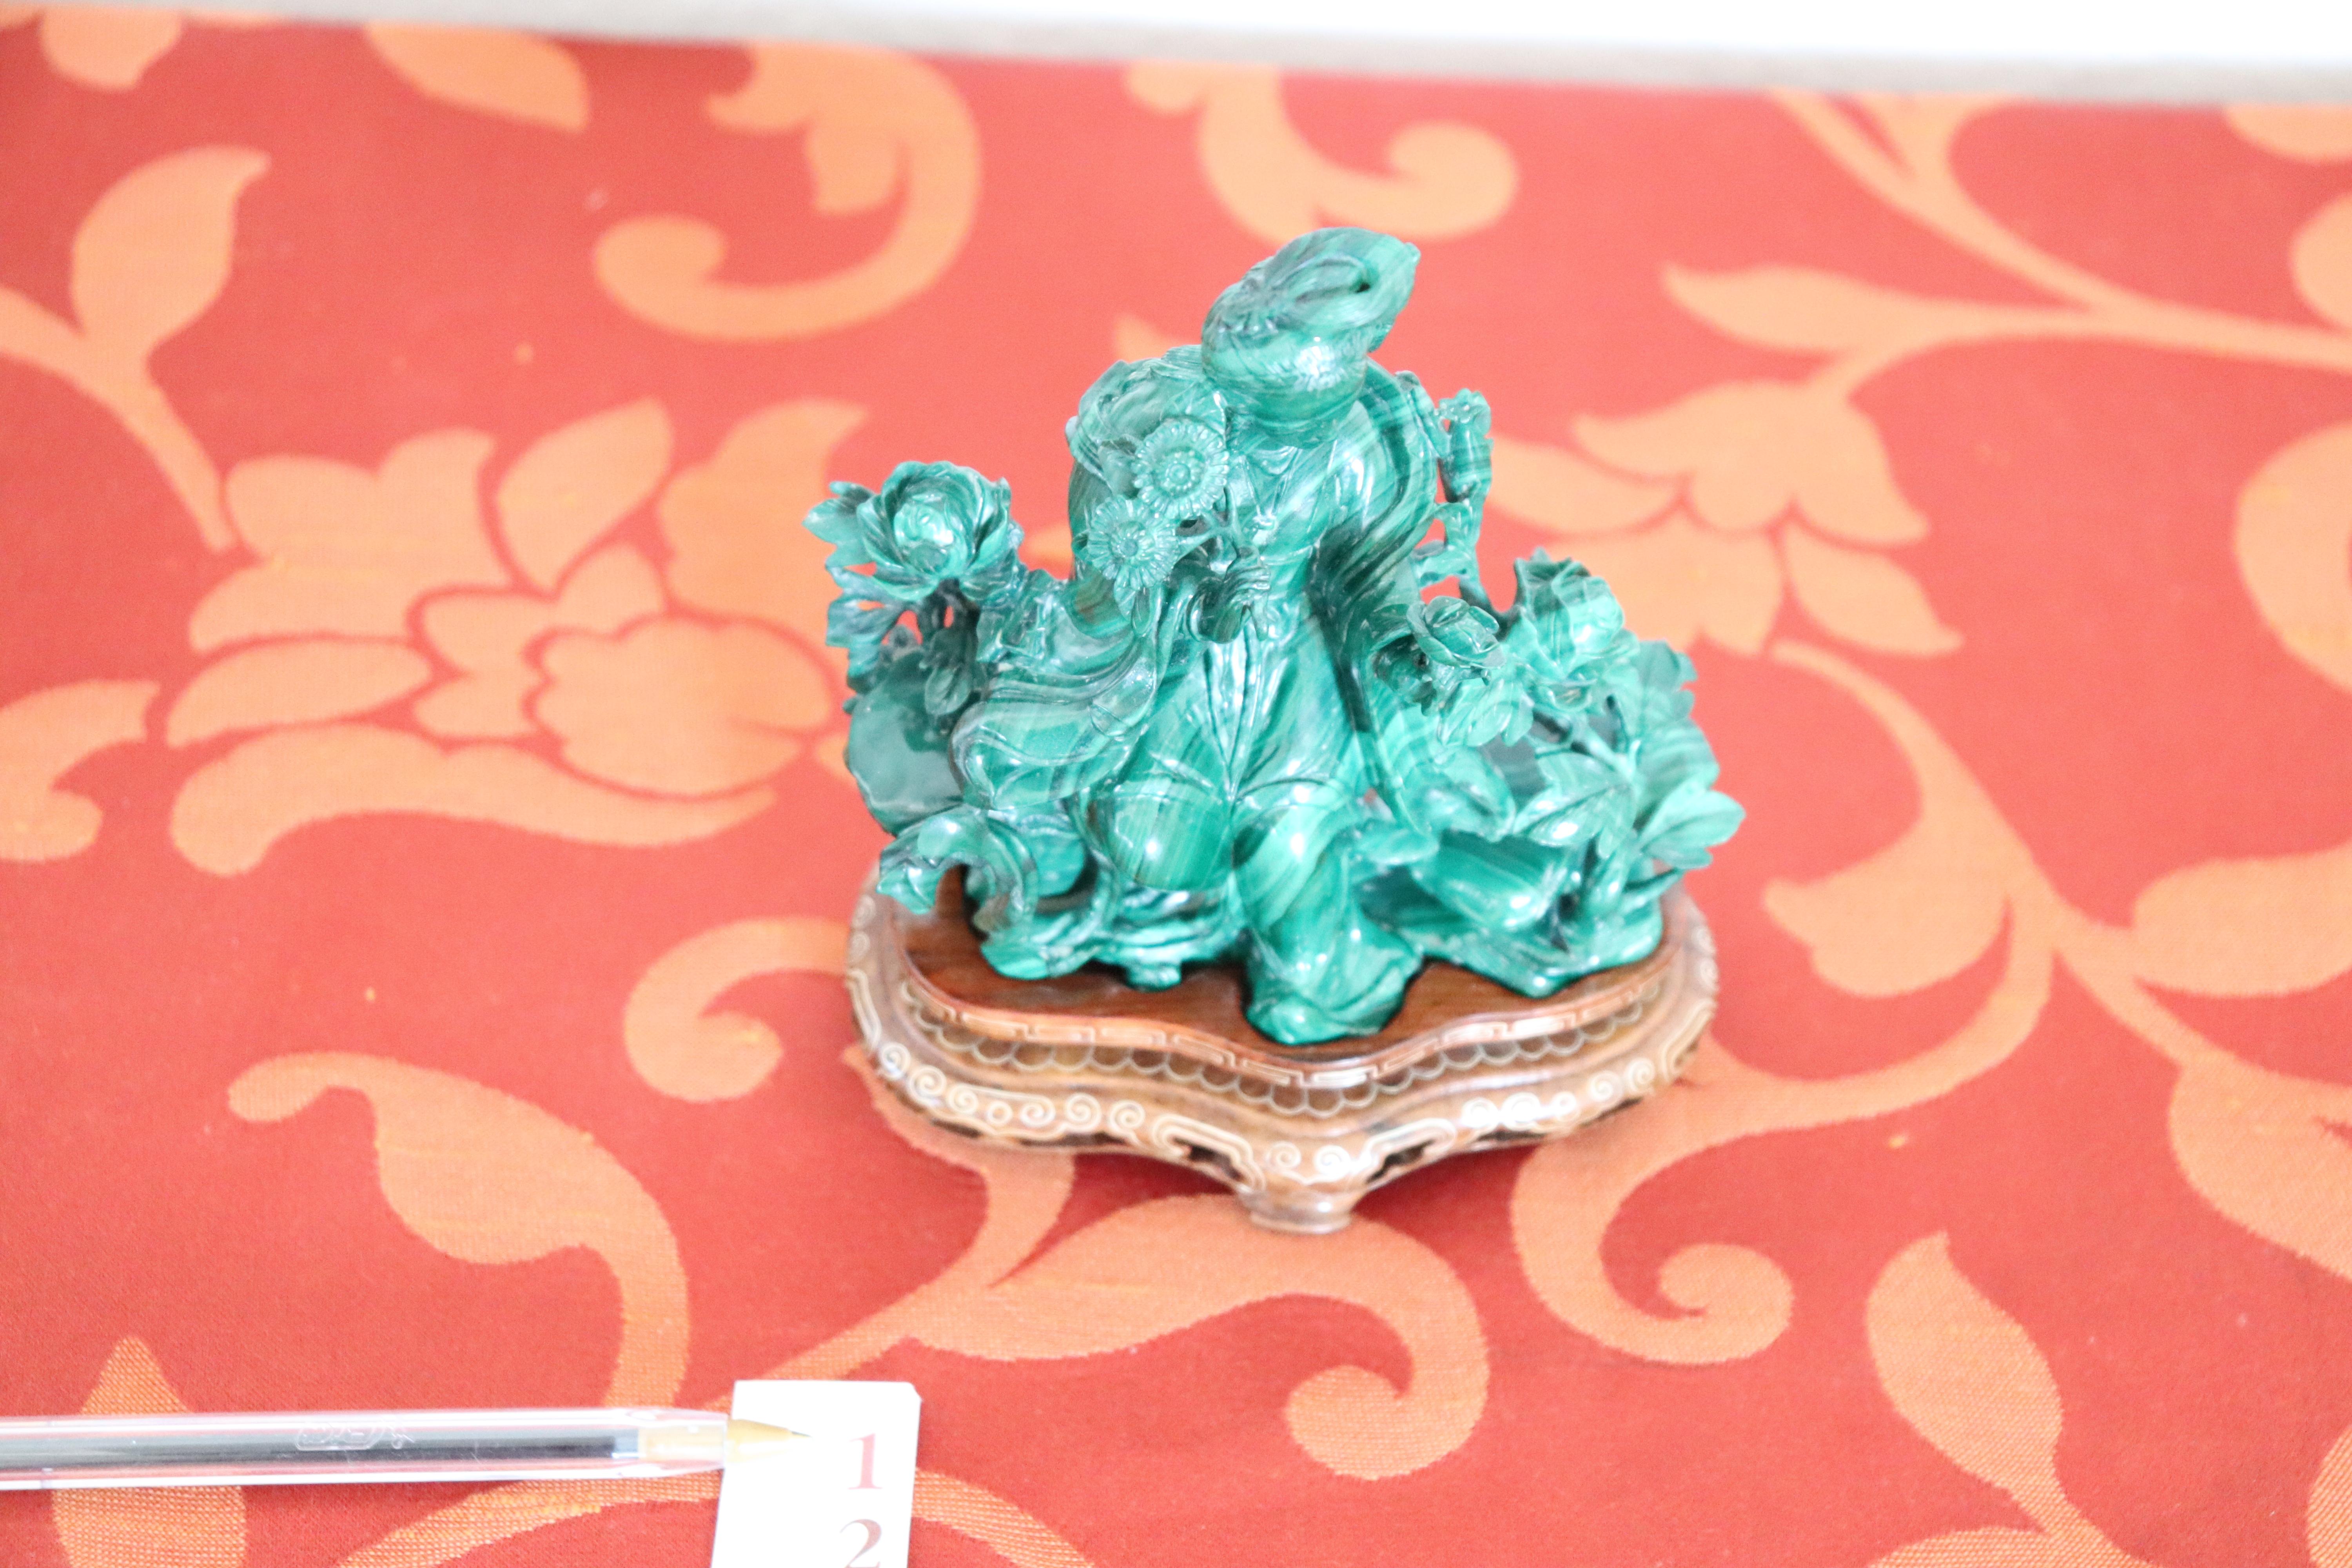 Beautiful sculpture in precious malachite made in china years 1930s. Fine figure of geisha on wooden base.